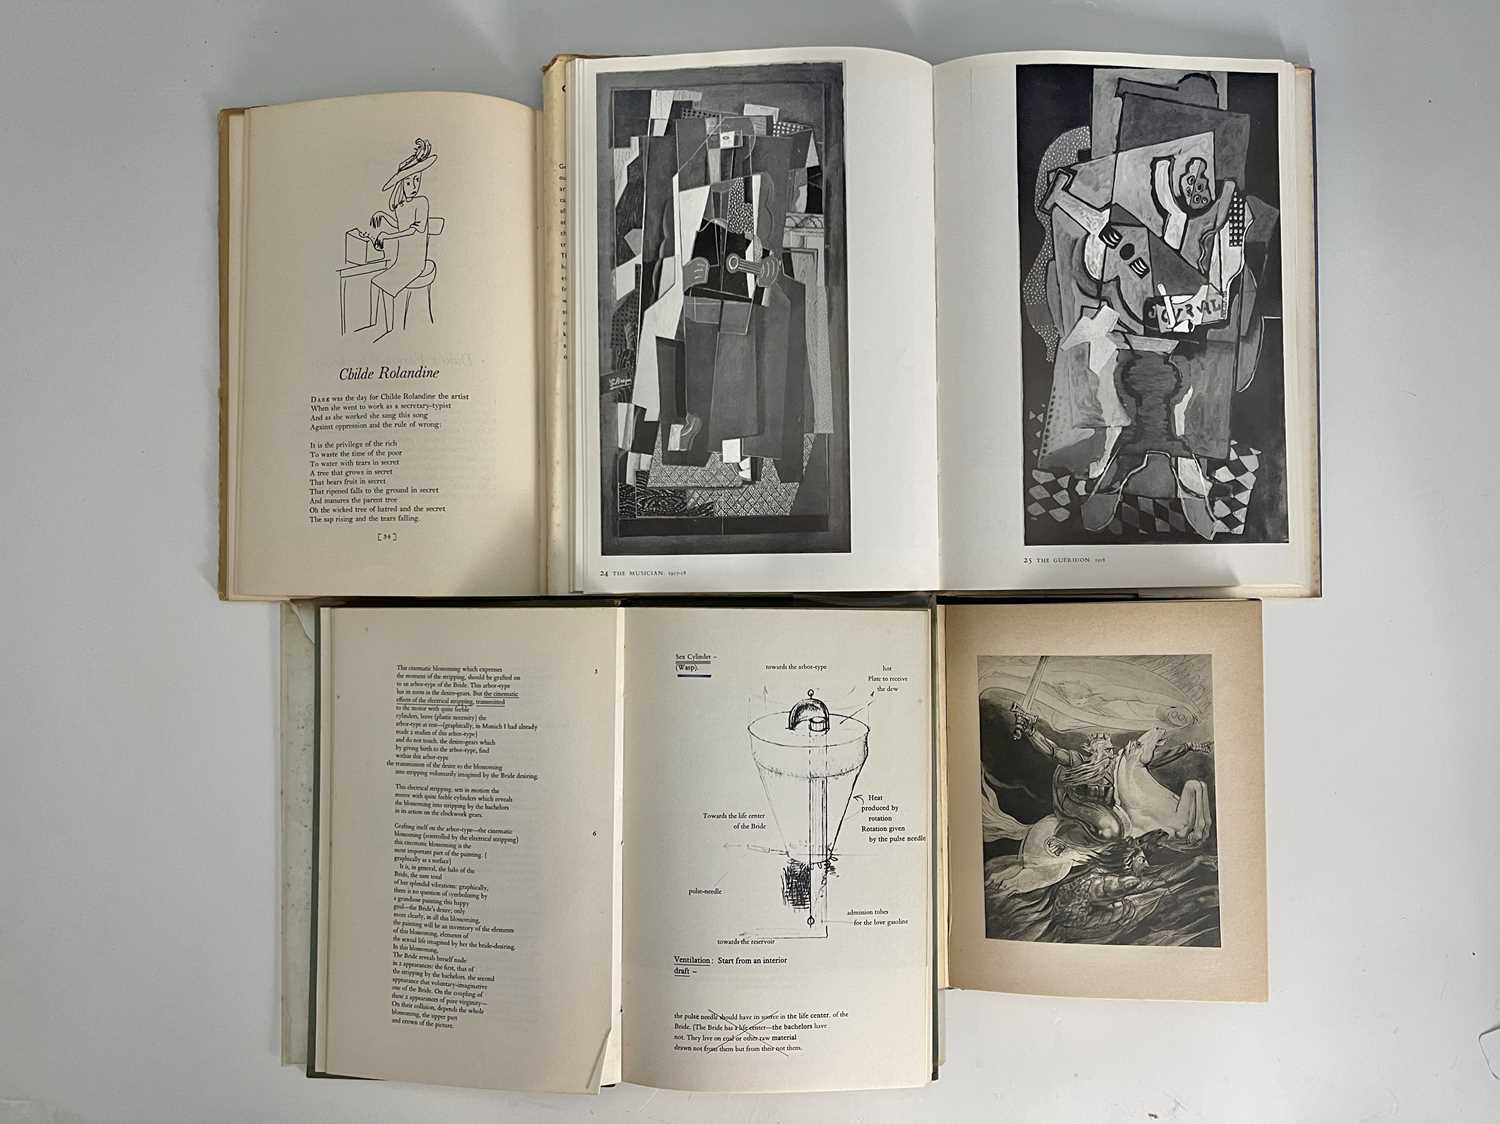 Russell, John, 'G. Braque', 1959, Phaidon Press, London, with Philippe, Soupault, 'William Blake', - Image 2 of 2